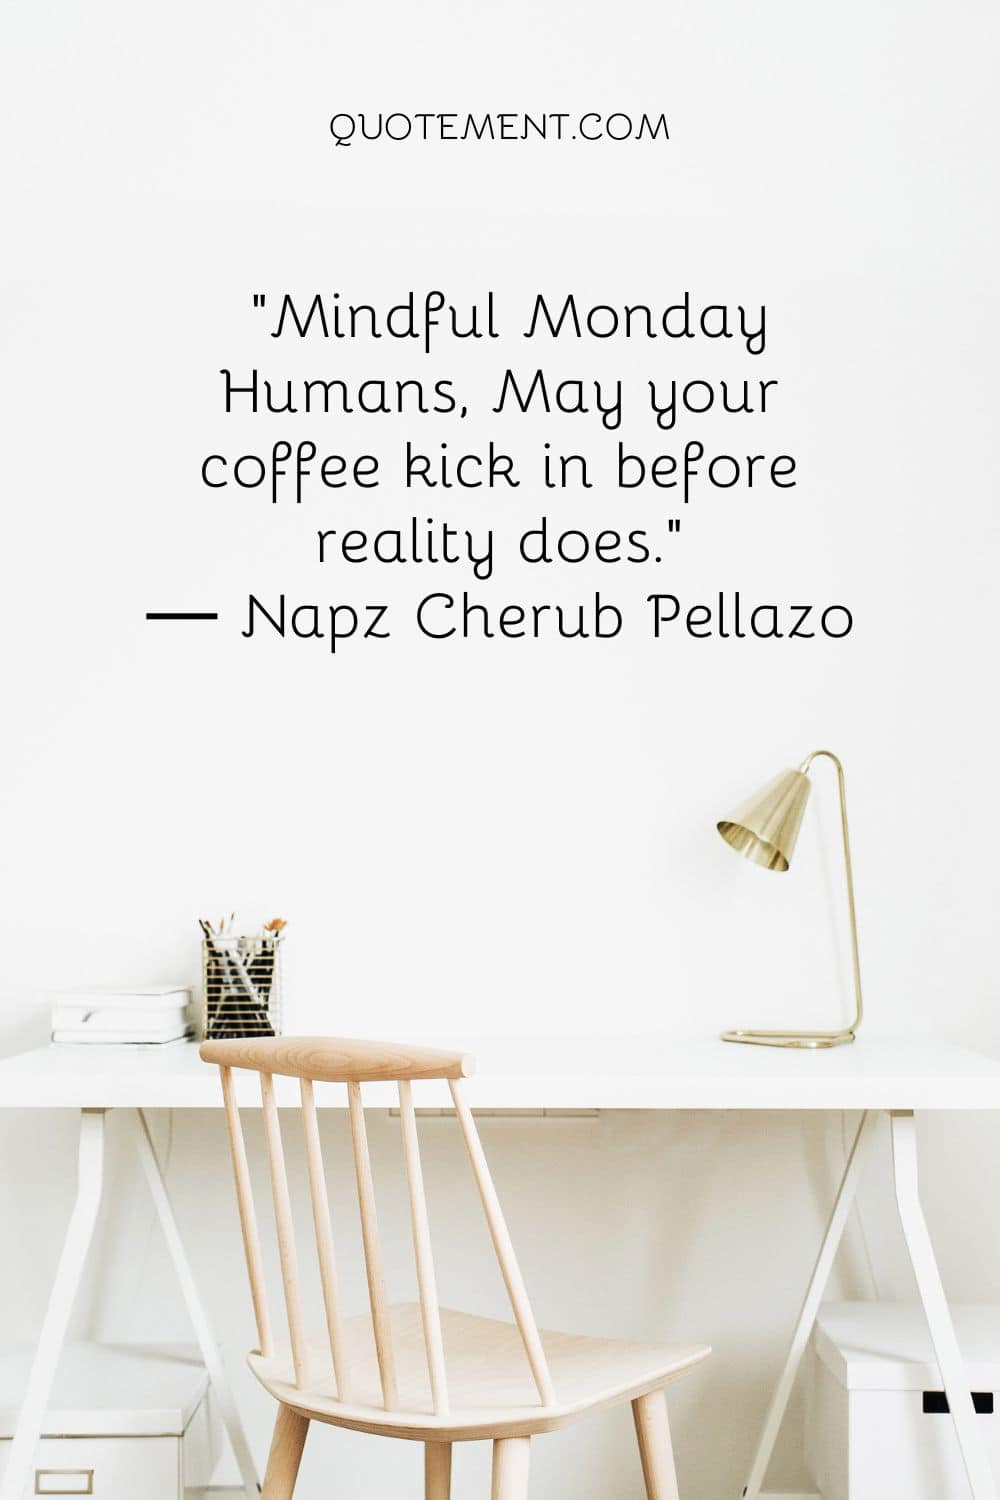 Mindful Monday Humans, May your coffee kick in before reality does